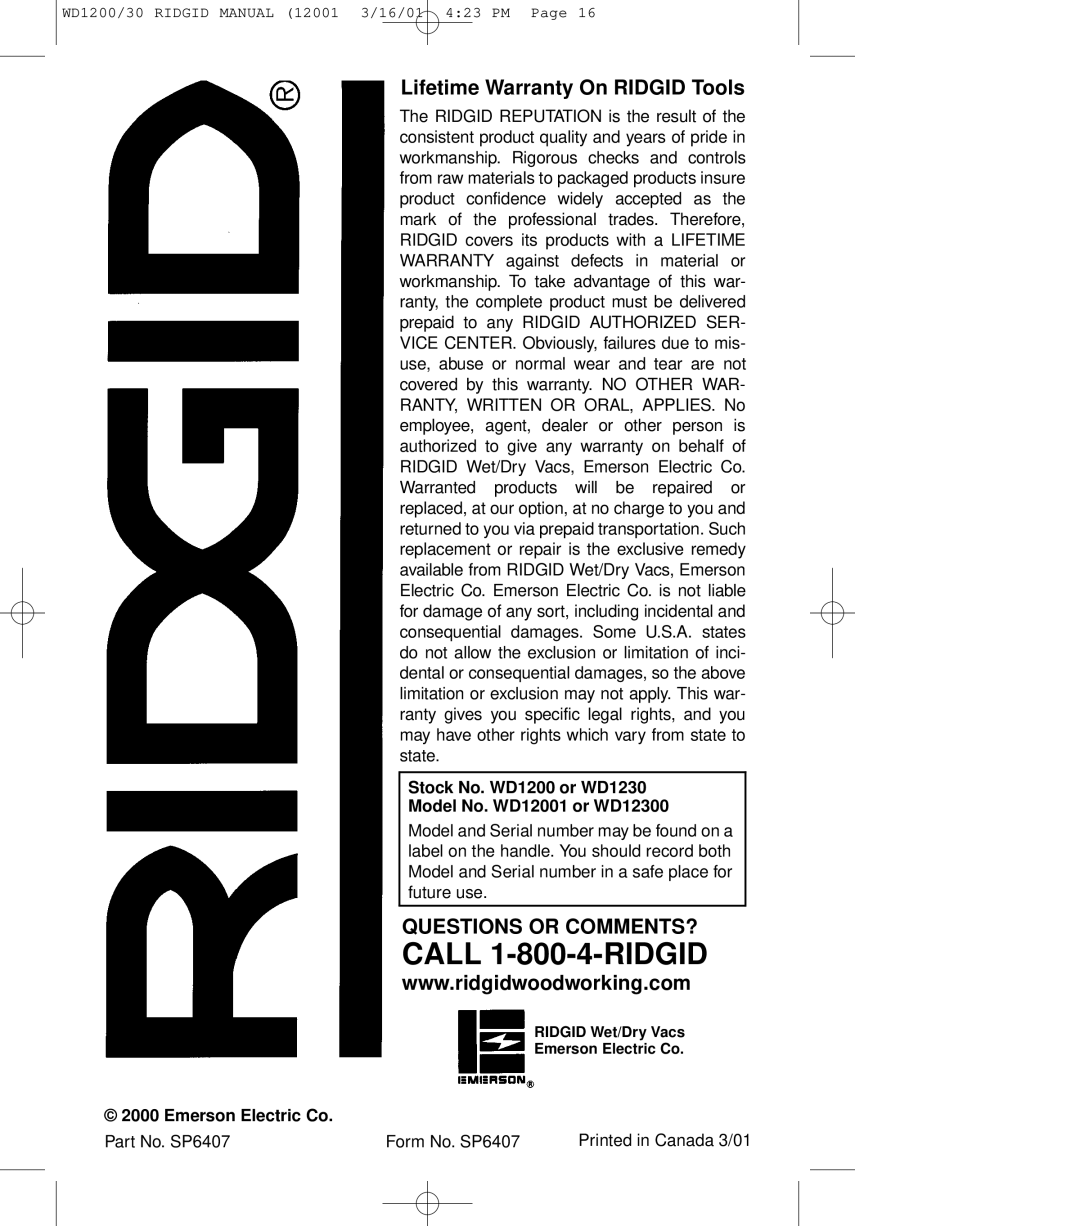 RIDGID WD1230, WD1200 Lifetime Warranty On RIDGID Tools, Questions Or Comments?, RIDGID Wet/Dry Vacs Emerson Electric Co 